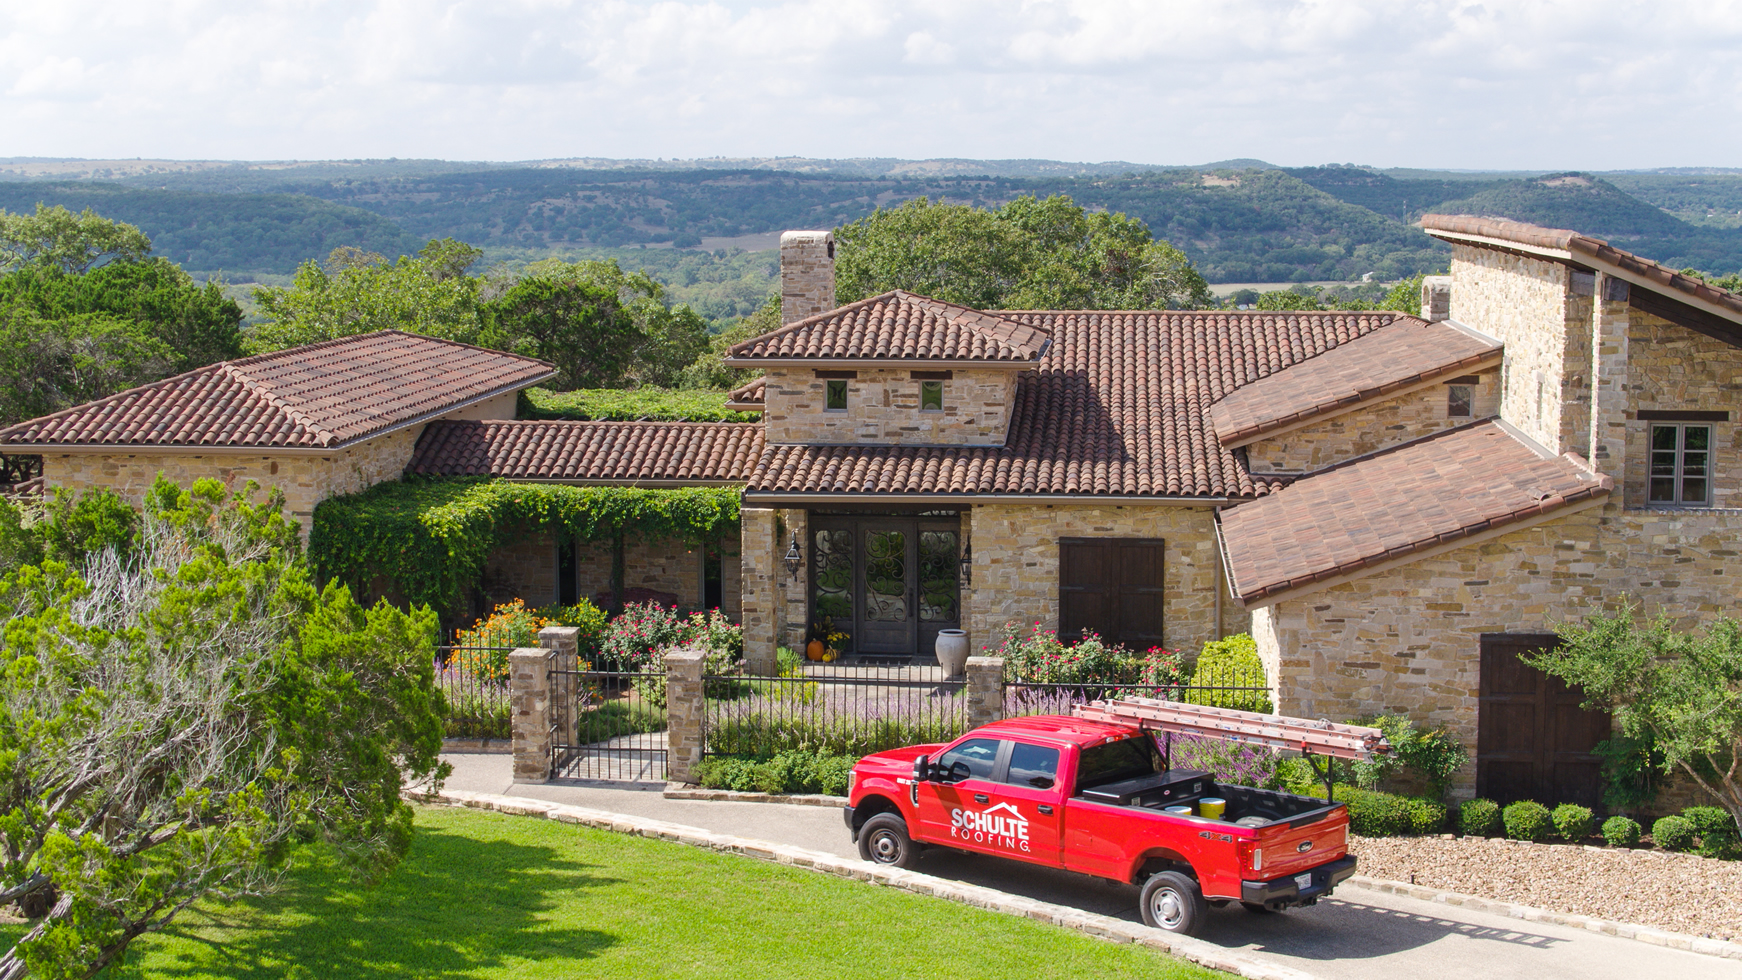 A variety of San Antonio roofing, styling, and performance options, with Schulte Roofing®.